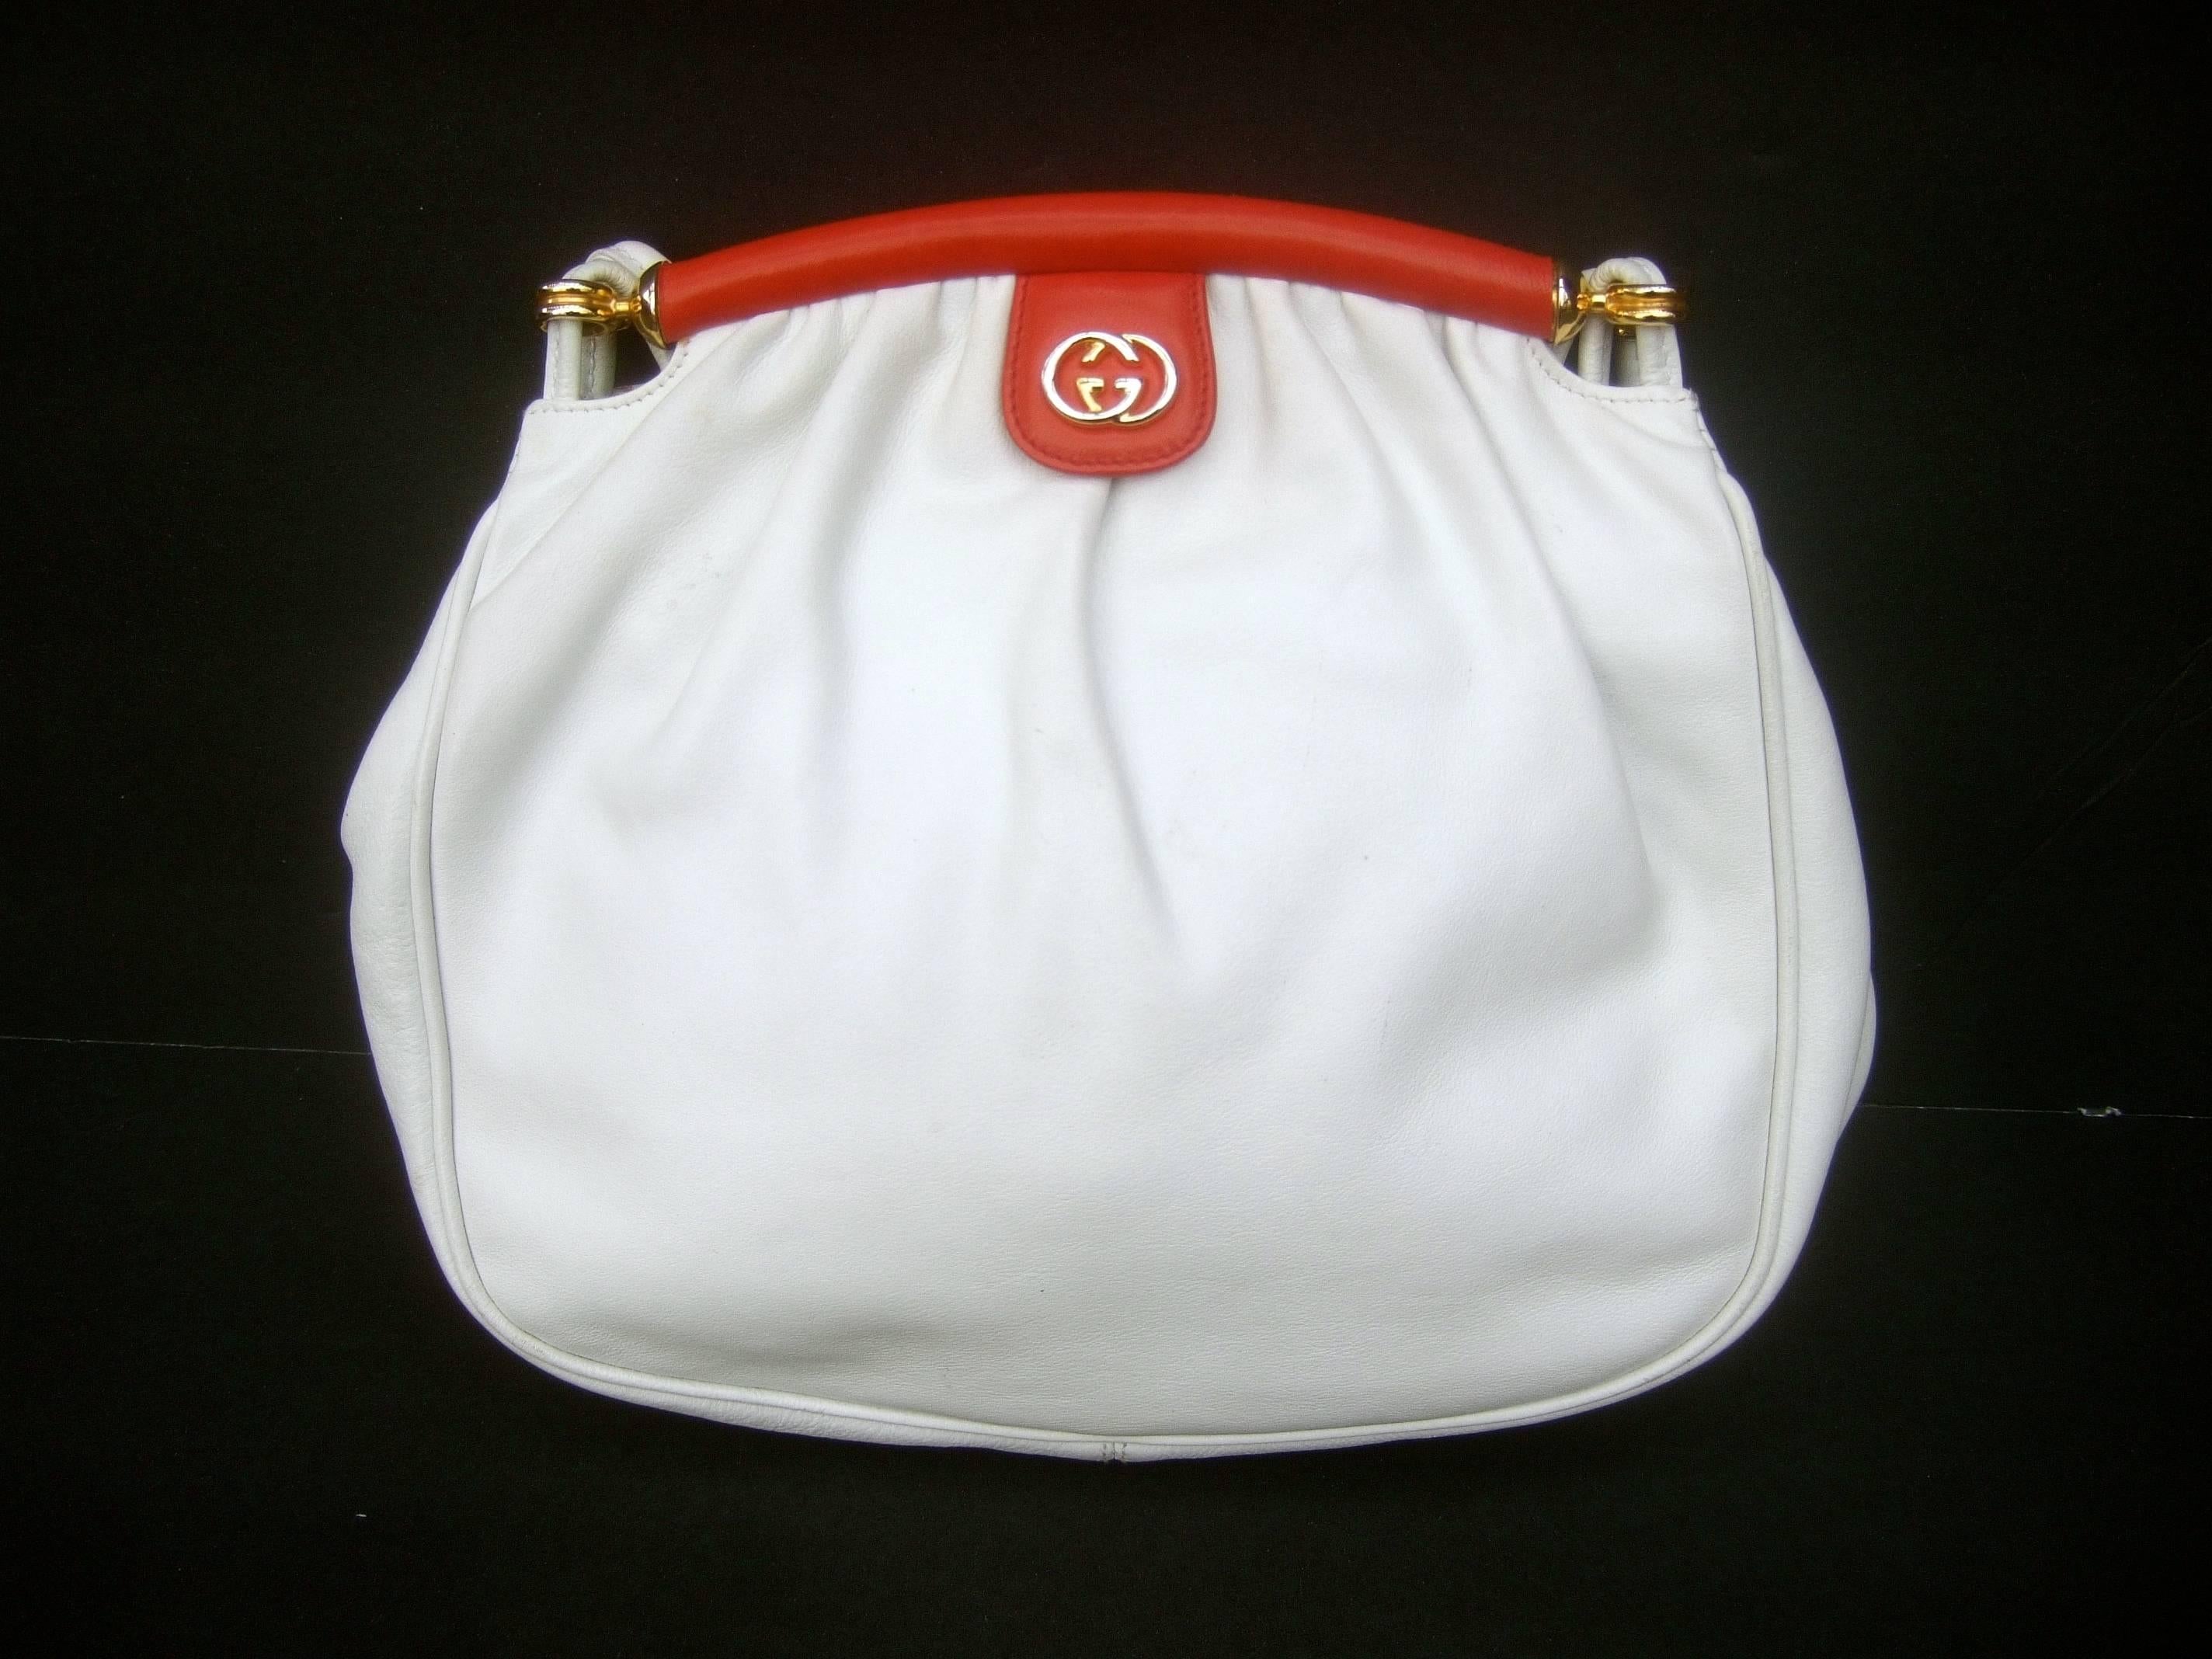 Gucci Italy Crisp white leather versatile shoulder bag c 1980s
The Italian white leather handbag is accented with red
leather that runs across the clasp opening

Gucci's interlocked G.G. initials are adhered to a red 
leather plaque. The versatile